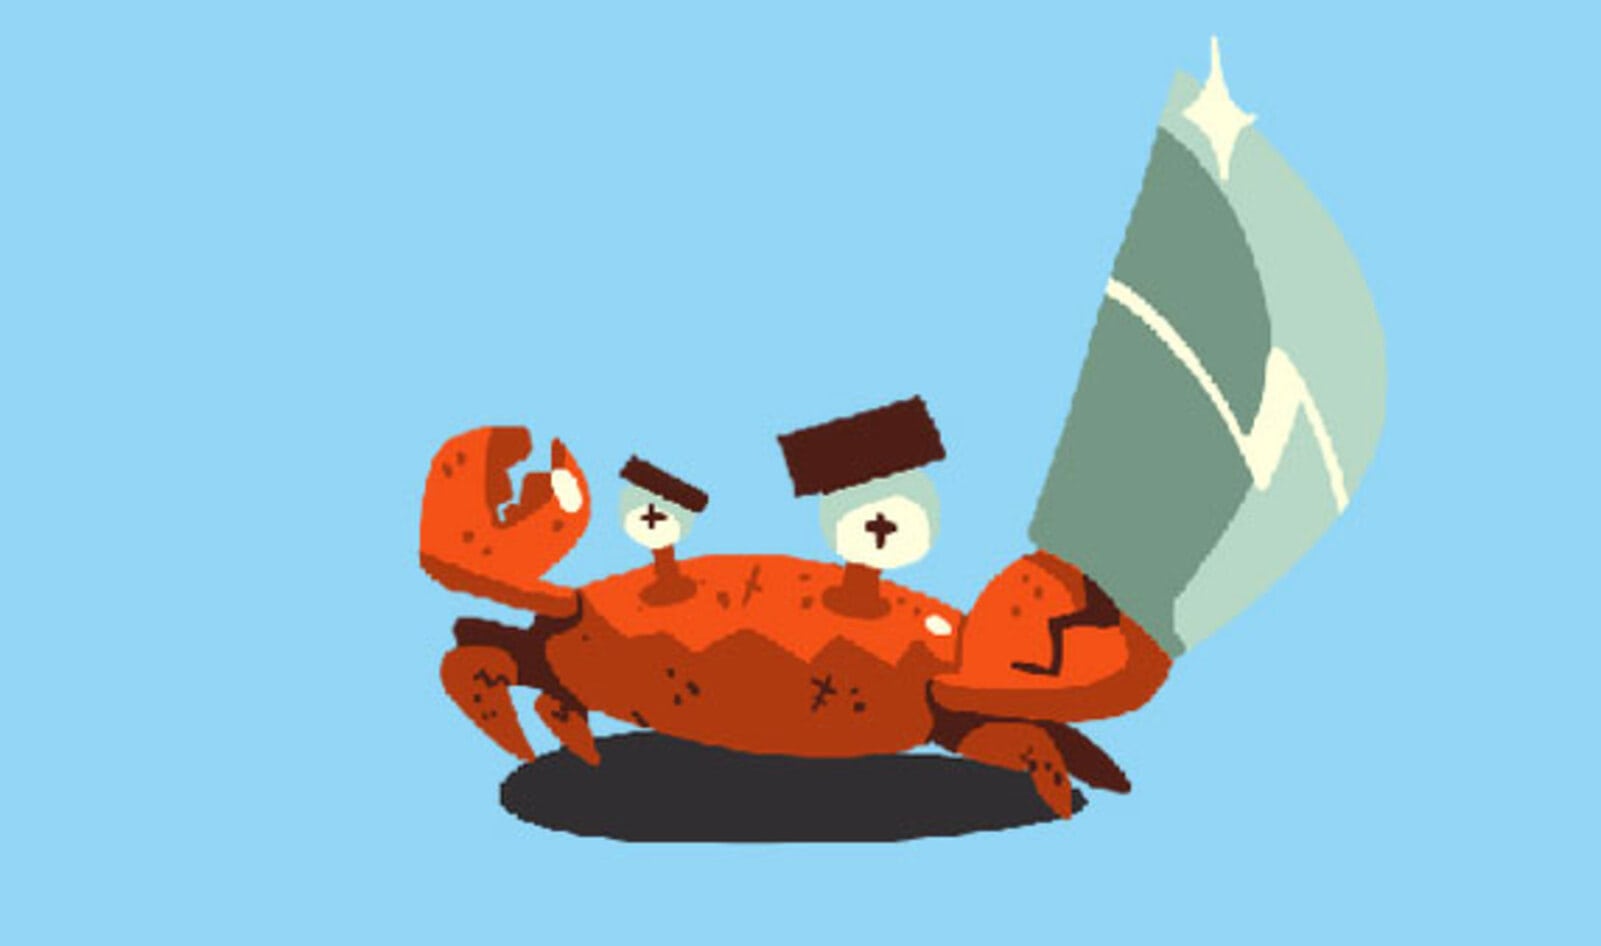 New Game Lets You Be a Knife-Wielding Crab That Gets Revenge on Your Captors